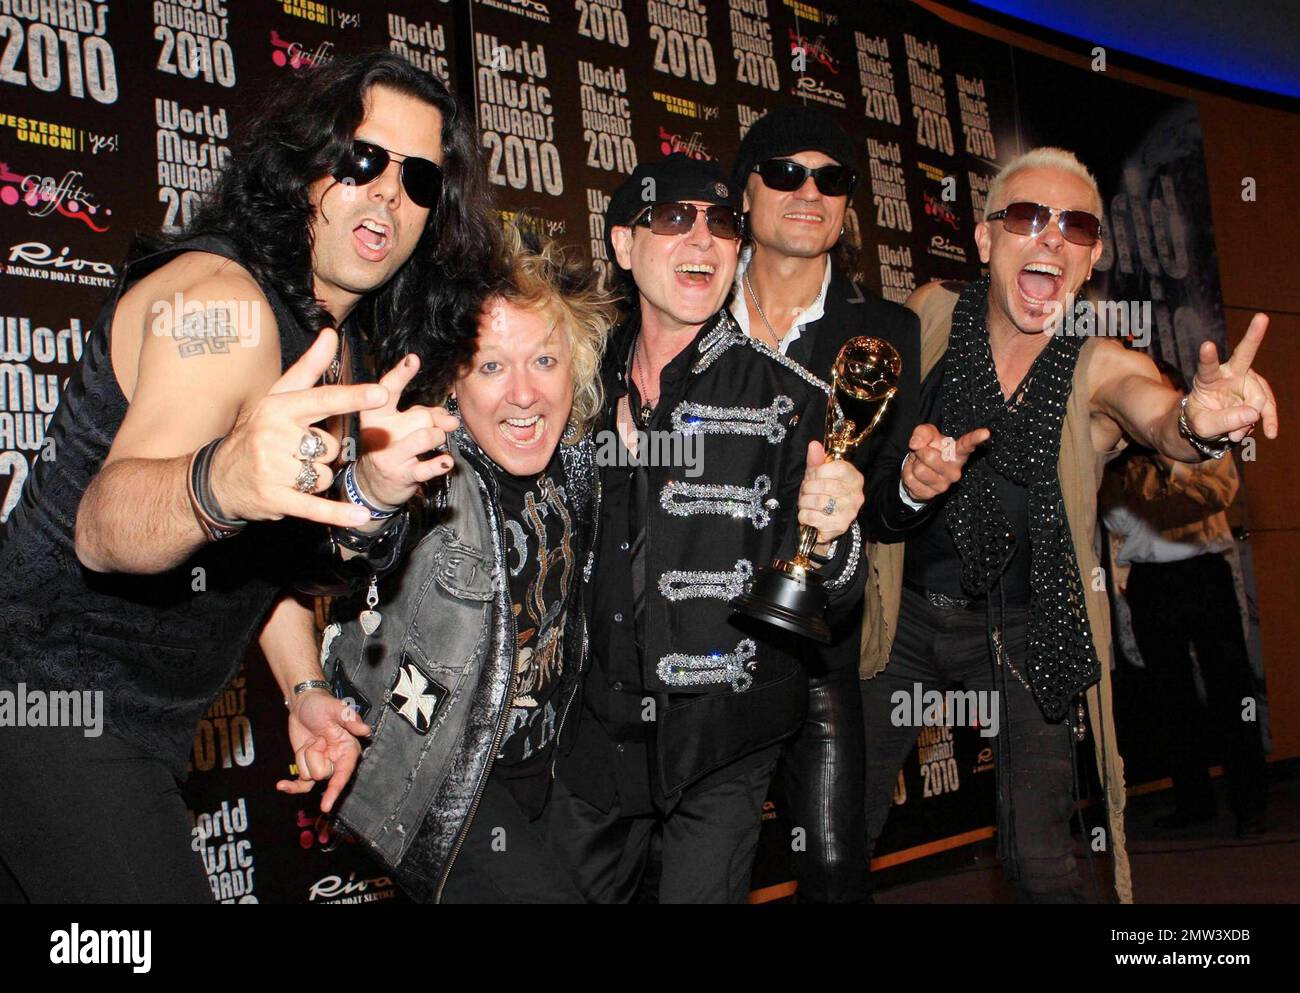 Pawel Maciwoda, James Kottak, Klaus Meine, Matthias Jabs and Rudolf Schenker of the German rock band Scorpions pose with their award at the Sporting Club Monte-Carlo after the annual World Music Awards 2010.  The award show, which was founded in 1989 to honor international recording artists based on worldwide sales figures, was hosted by actresses Michelle Rodriguez and Hayden Panettiere.  Musicians who performed at the event included Jennifer Lopez, Akon, 50 Cent and Scorpions. Monte Carlo, Monaco. 05/18/10. Stock Photo